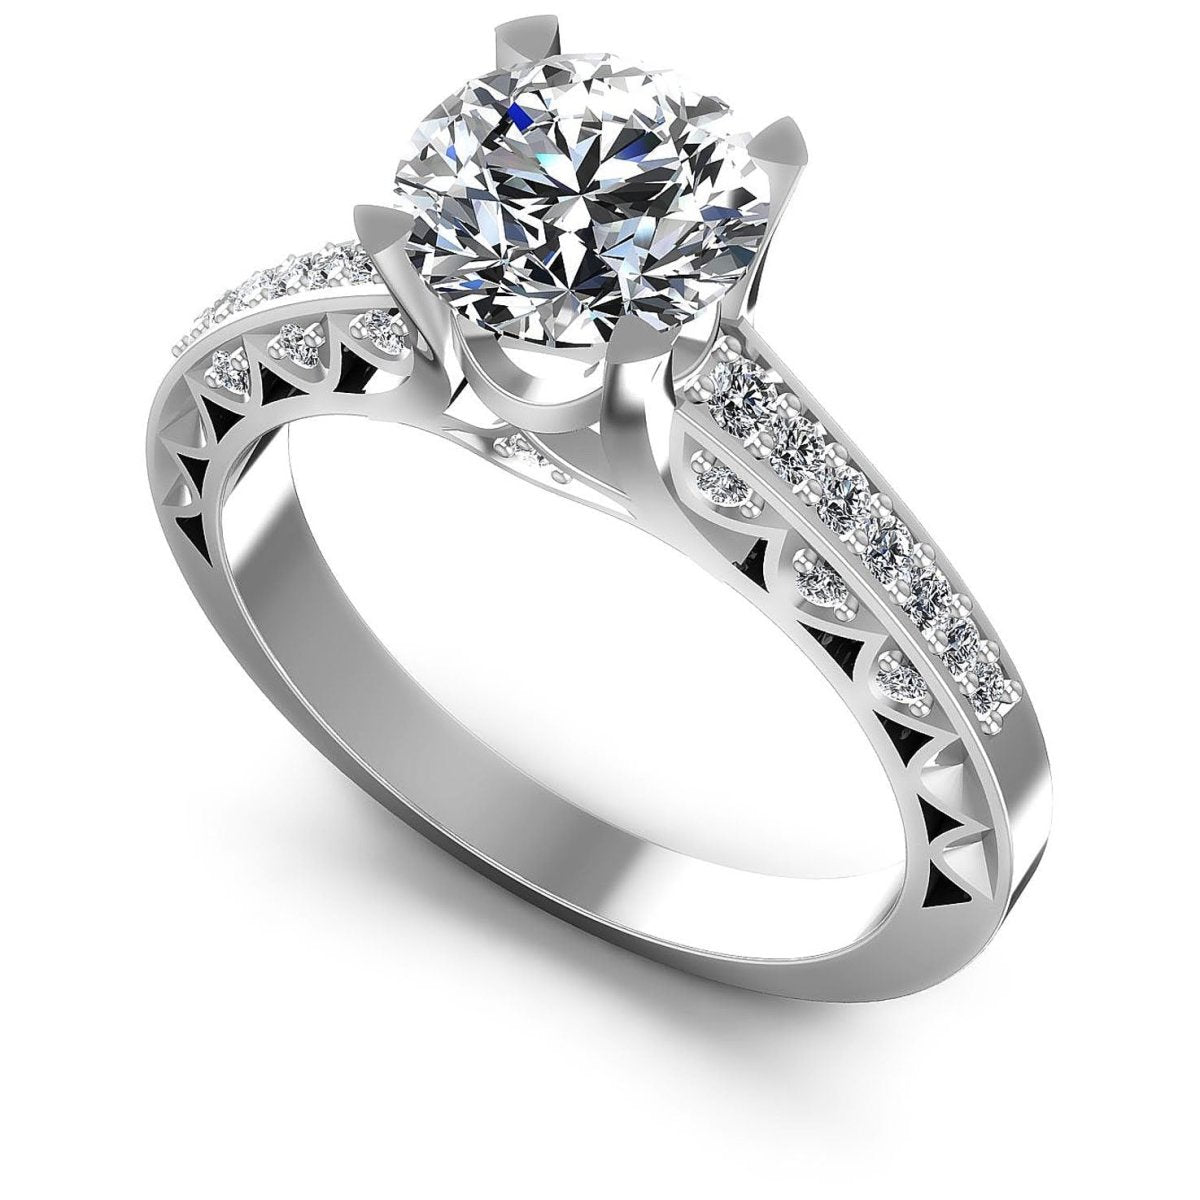 Affordable 0.60 CT Round Cut Diamond Engagement Ring in 14KT White Gold - Primestyle.com